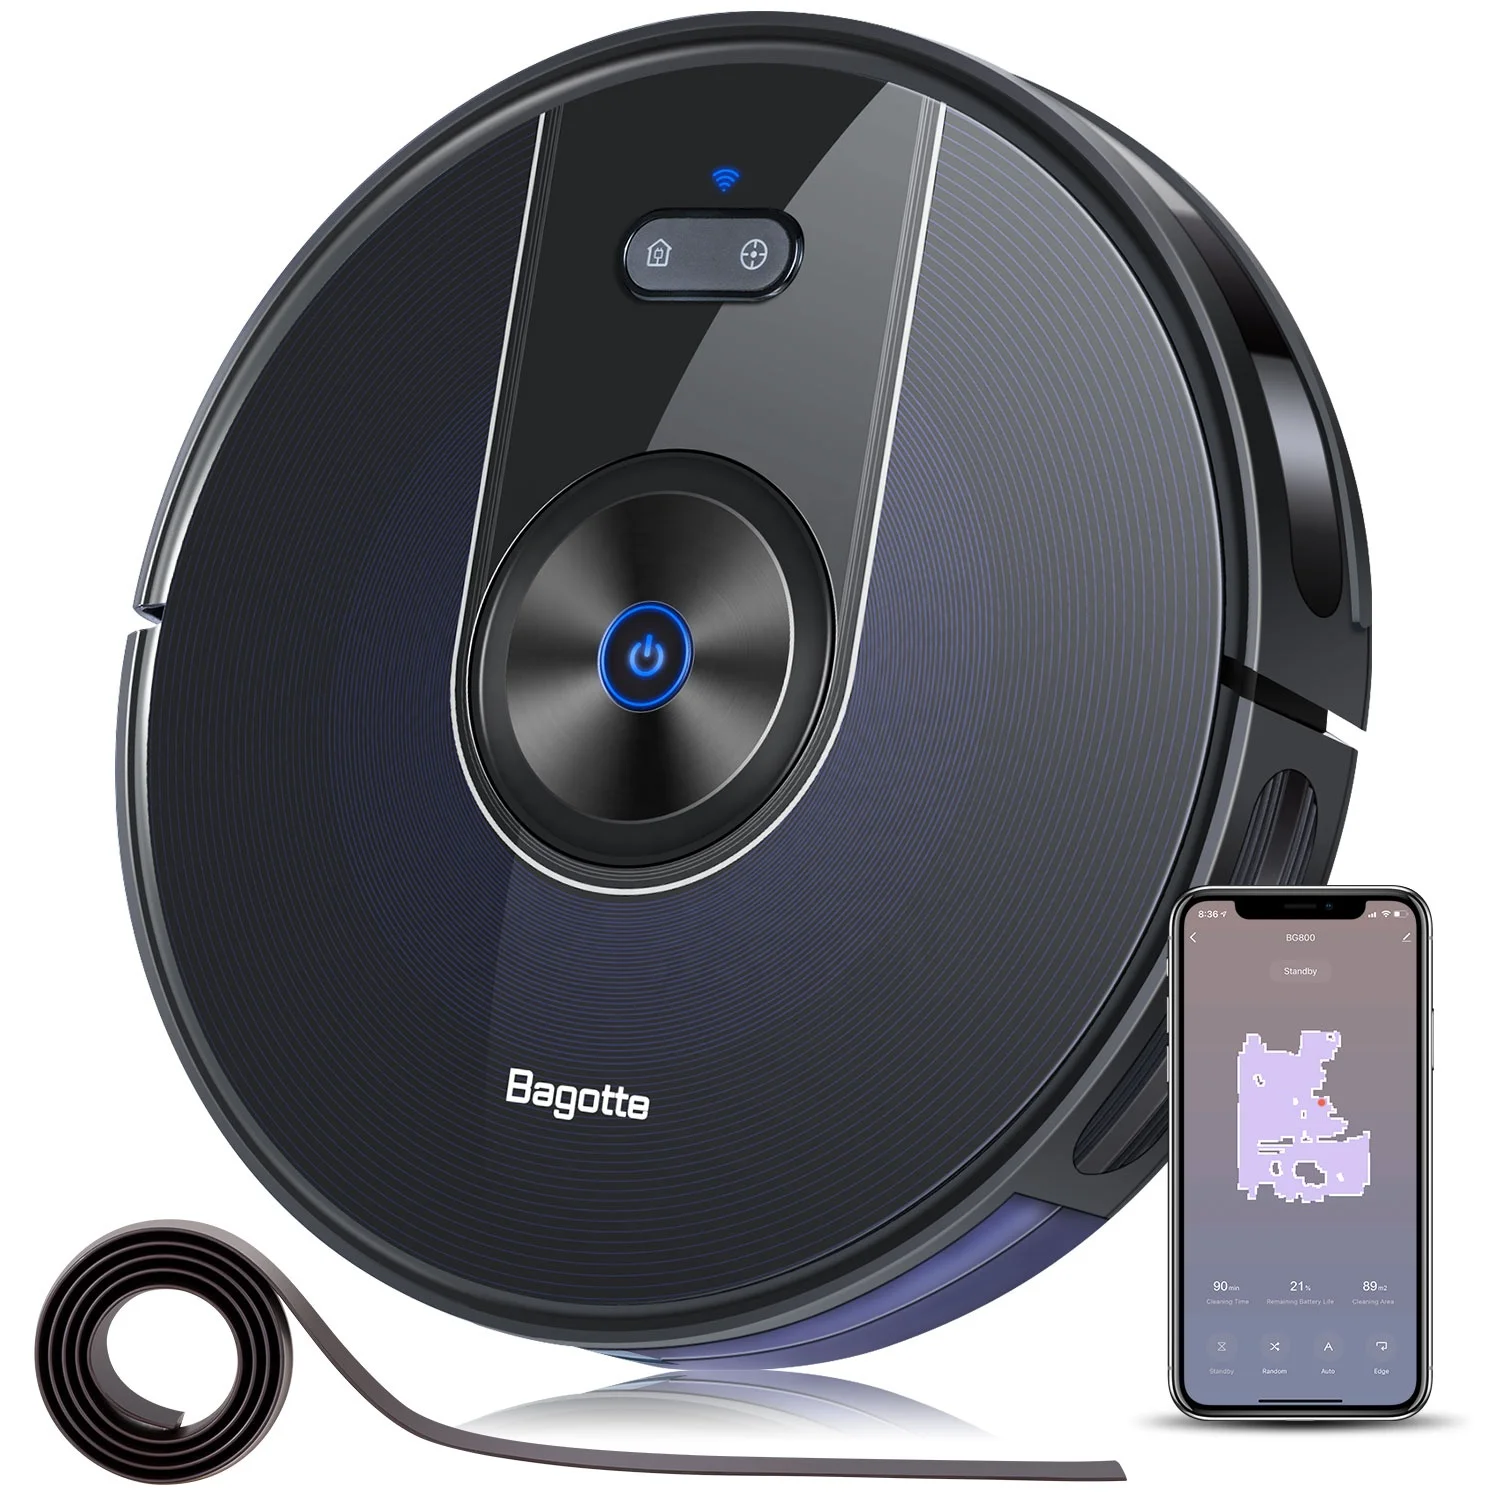 Bagotte BG800 Rohs Wet Dry Mopping Sweeping Mini Commercial Sale Cleaning Automatic Smart Robot Vacuums Cleaner For Home